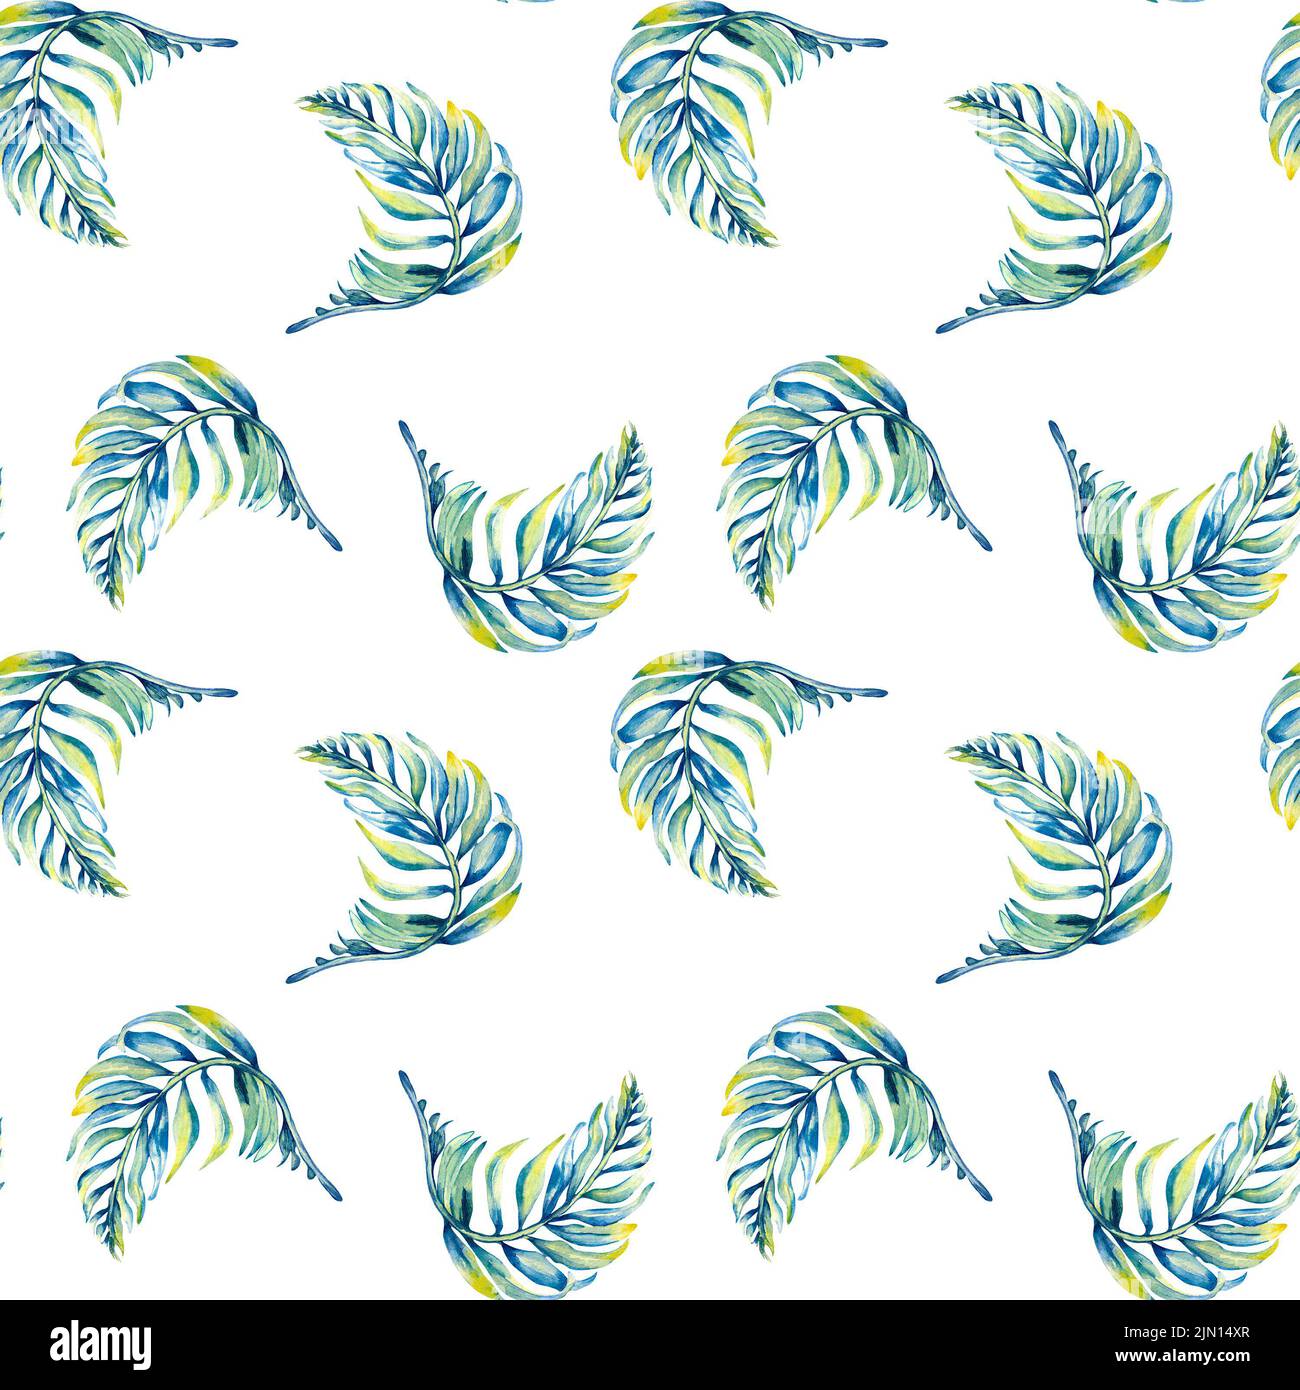 Exotic blue palm leaves seamless pattern watercolor illustration isolated. Floral print. Colorful tropical plants, palm elements, design for fabric, t Stock Photo